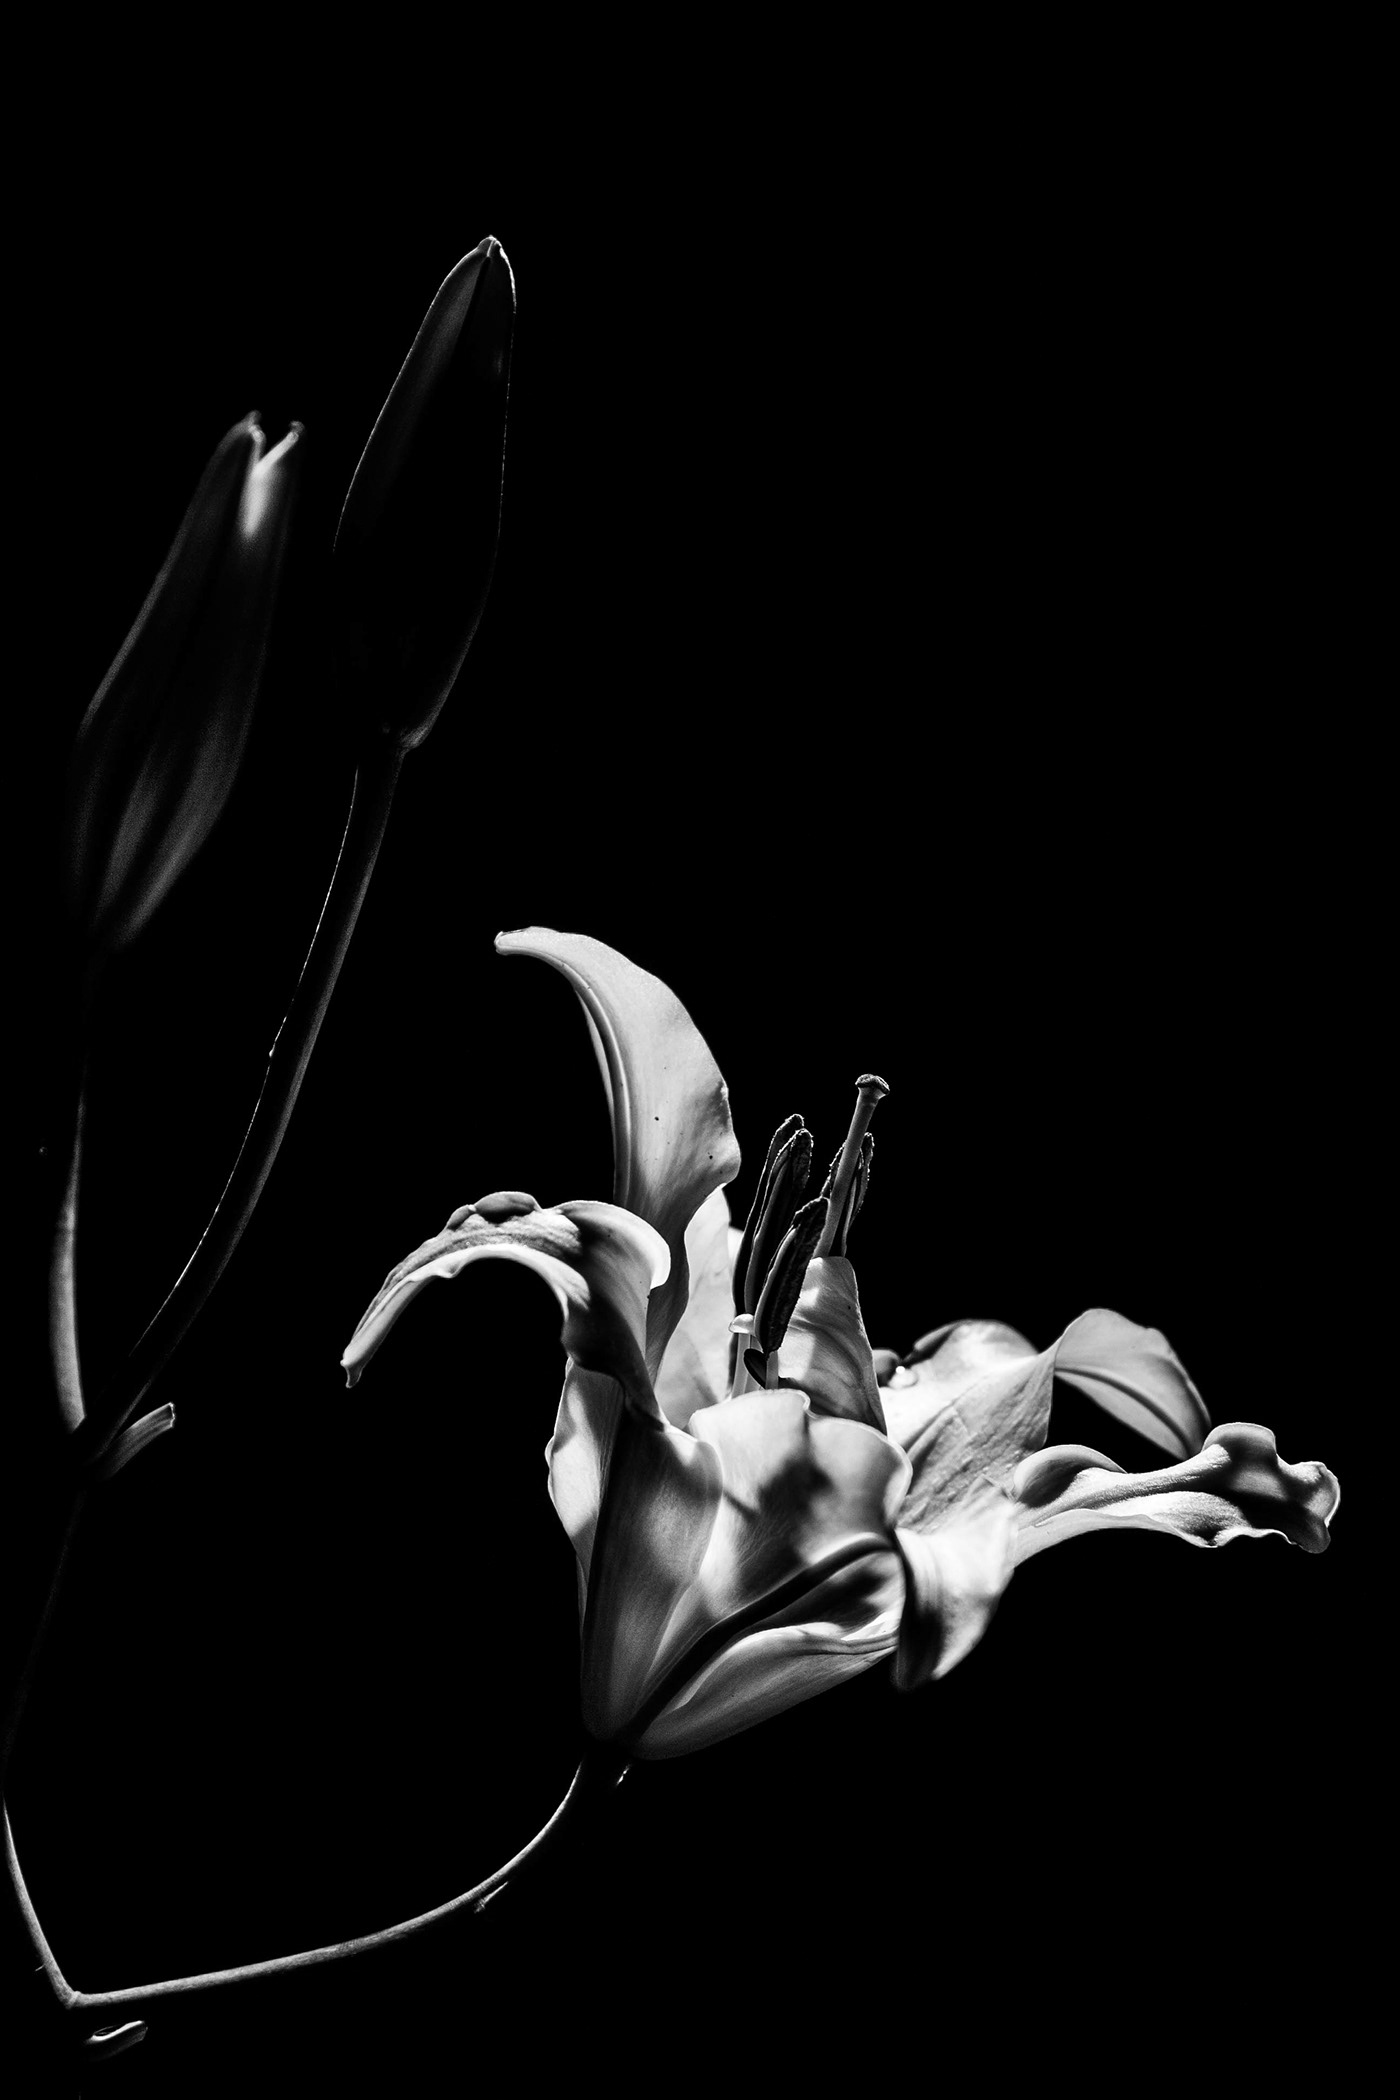 #still life #photography#flowers#abstract#black and white#university Project #presets Editing 